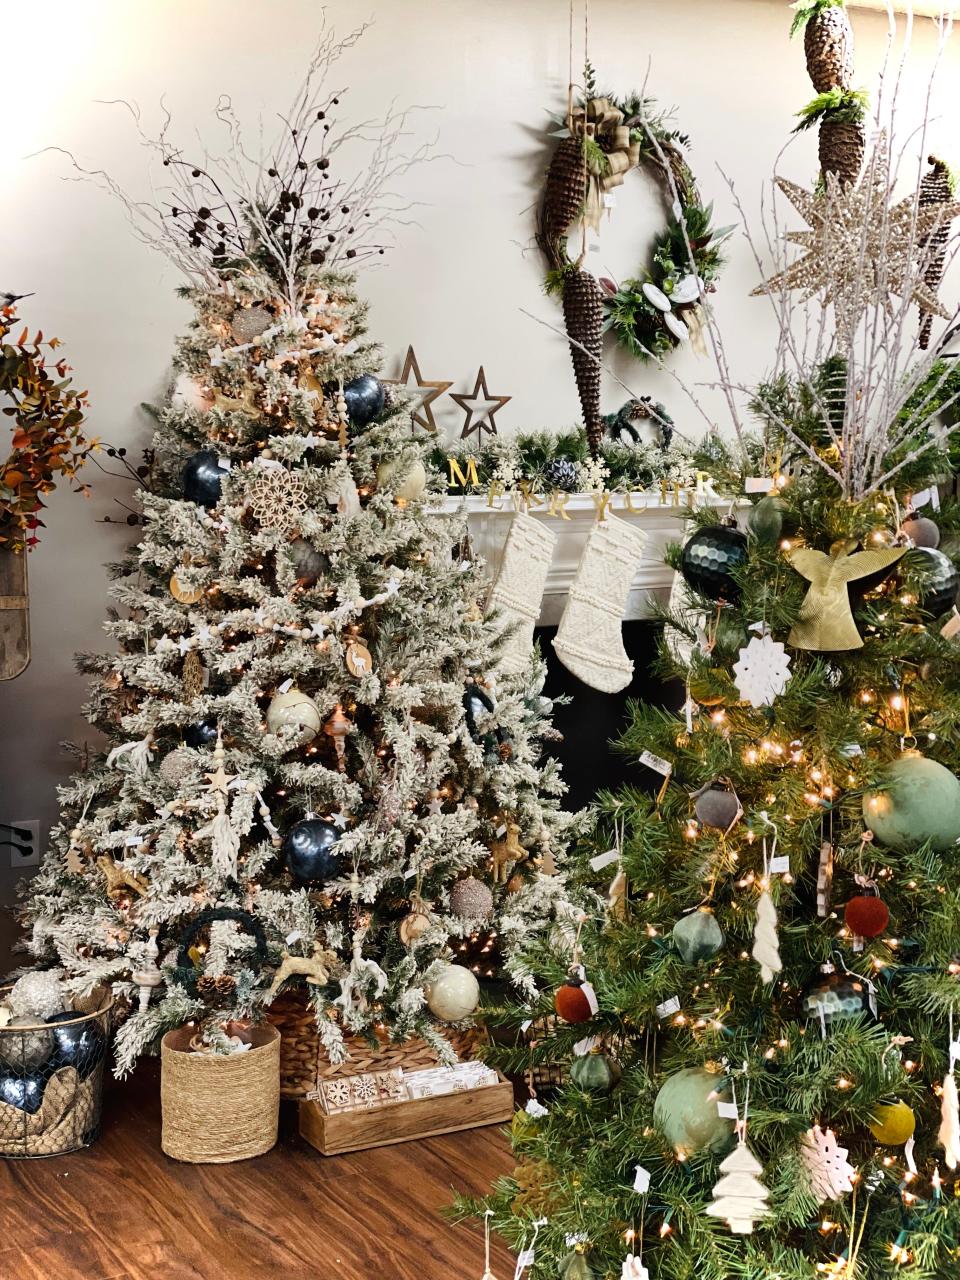 Whimsical woodsy decorations have been a popular, traditional Christmas theme this year at the Halls Flower Shop. Nov. 15, 2021.